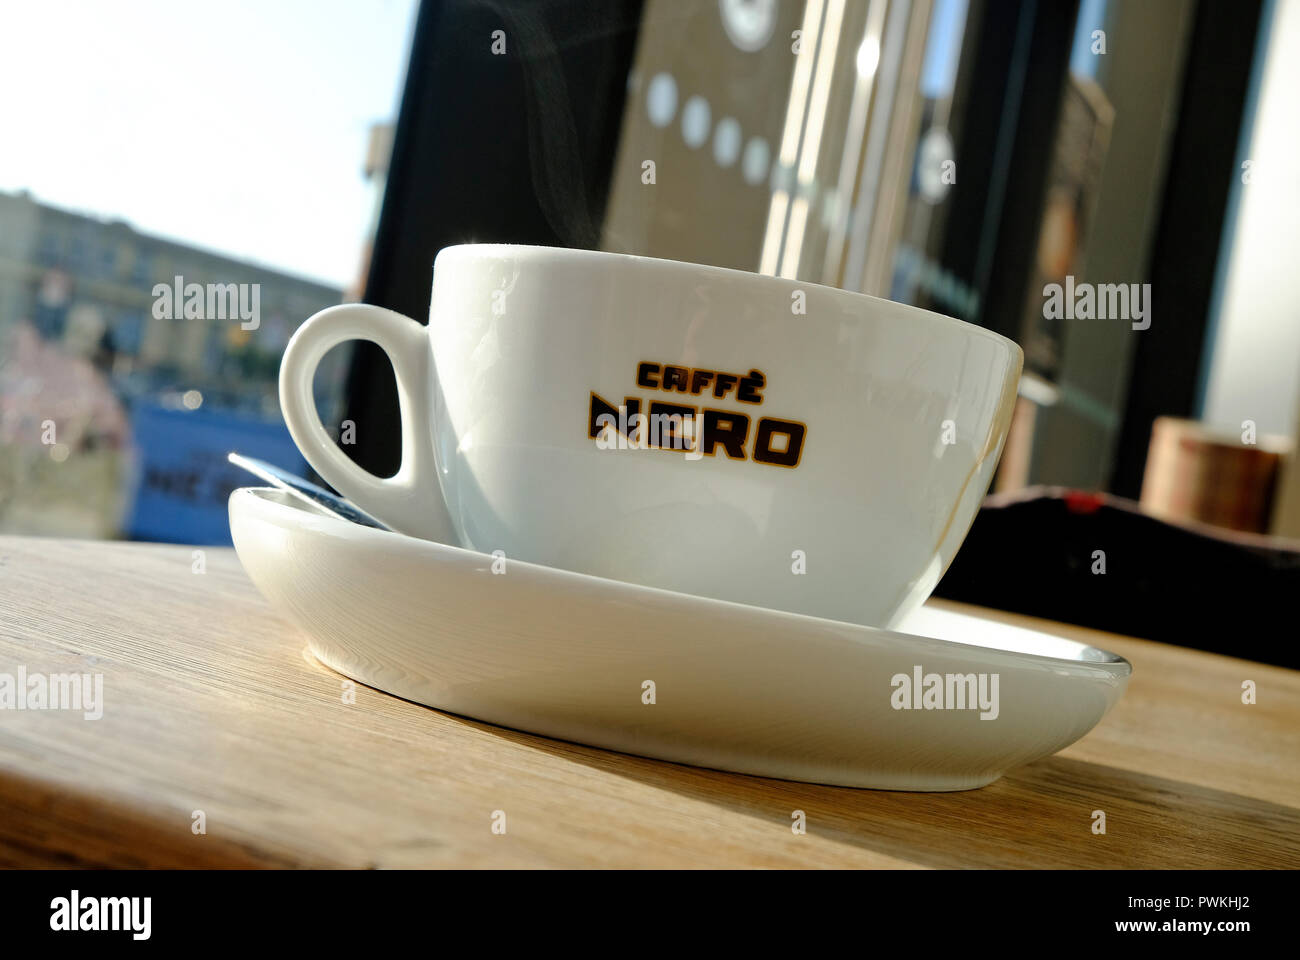 https://c8.alamy.com/comp/PWKHJ2/cup-of-caffe-nero-coffee-on-table-top-in-cafe-PWKHJ2.jpg